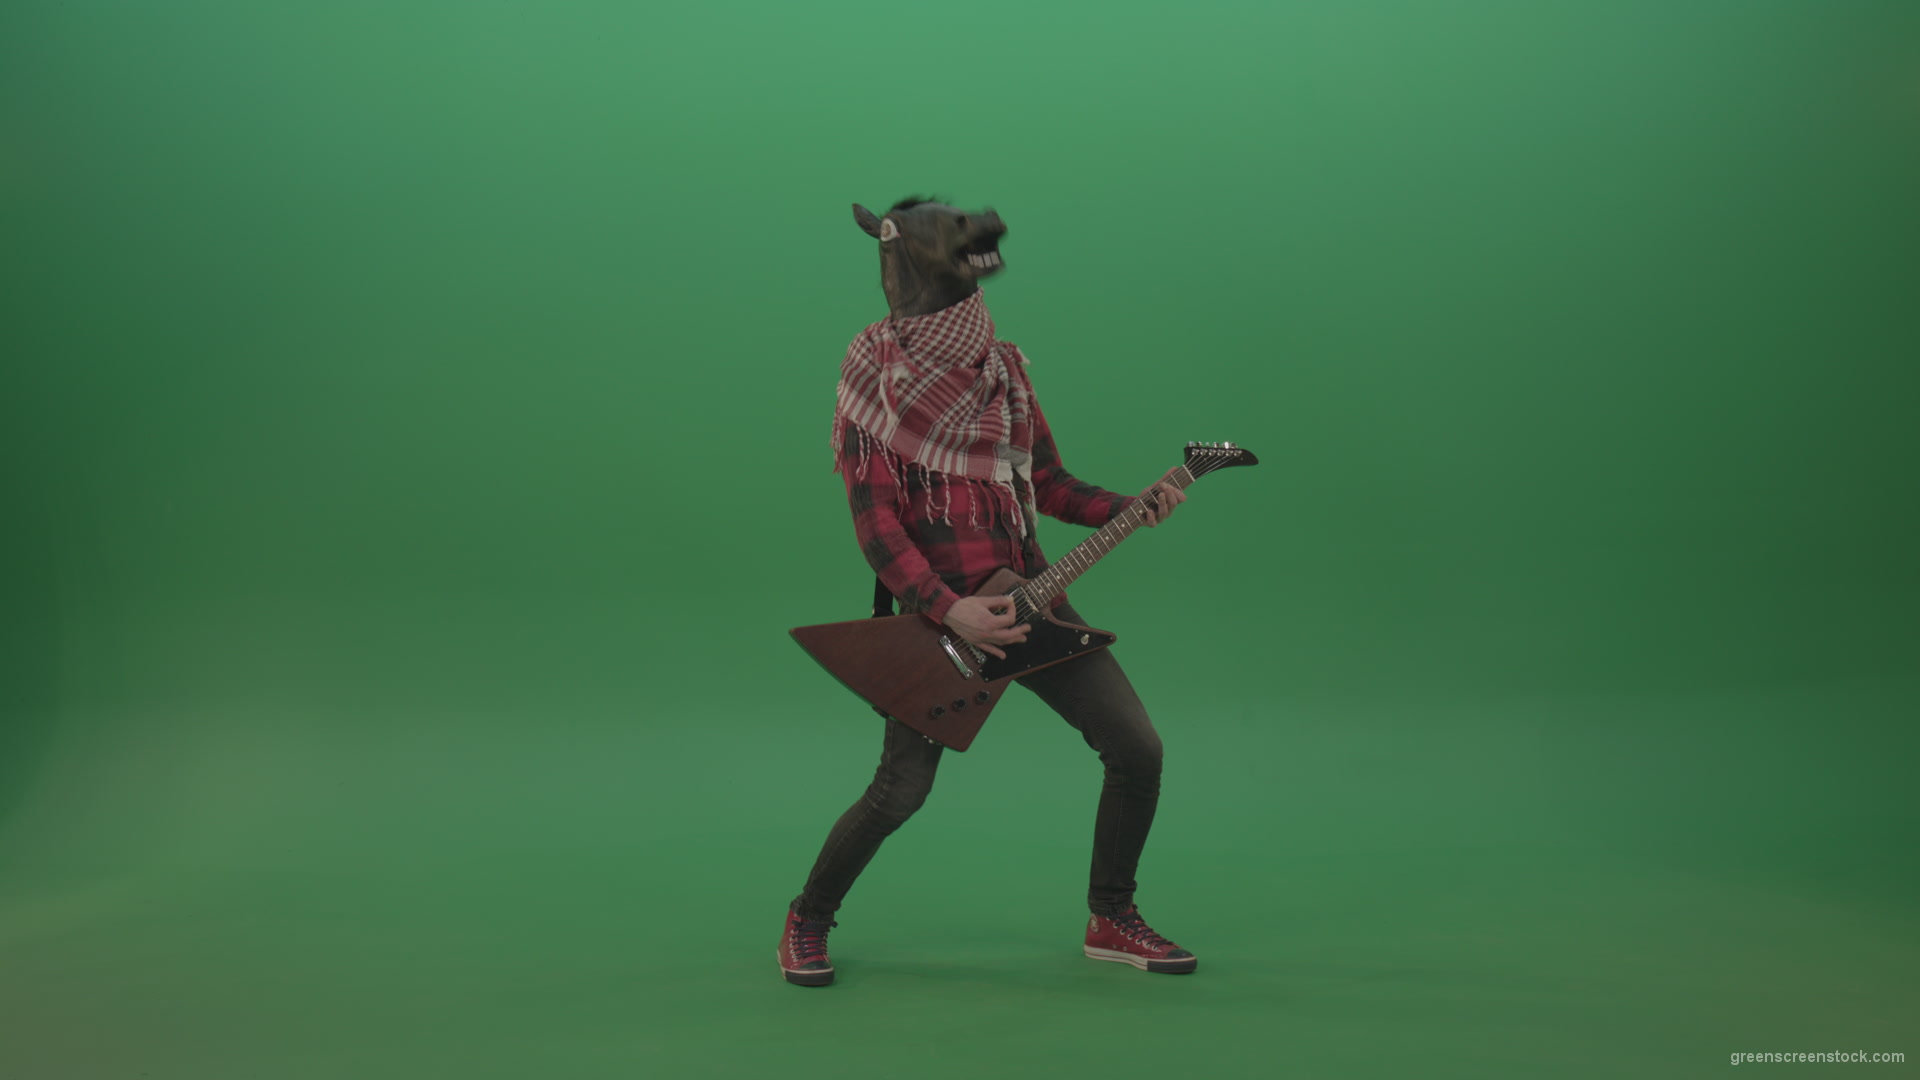 Green-screen-horse-man-guitaris-play-hard-rock-music-with-guitar-isolated-on-green-background_002 Green Screen Stock